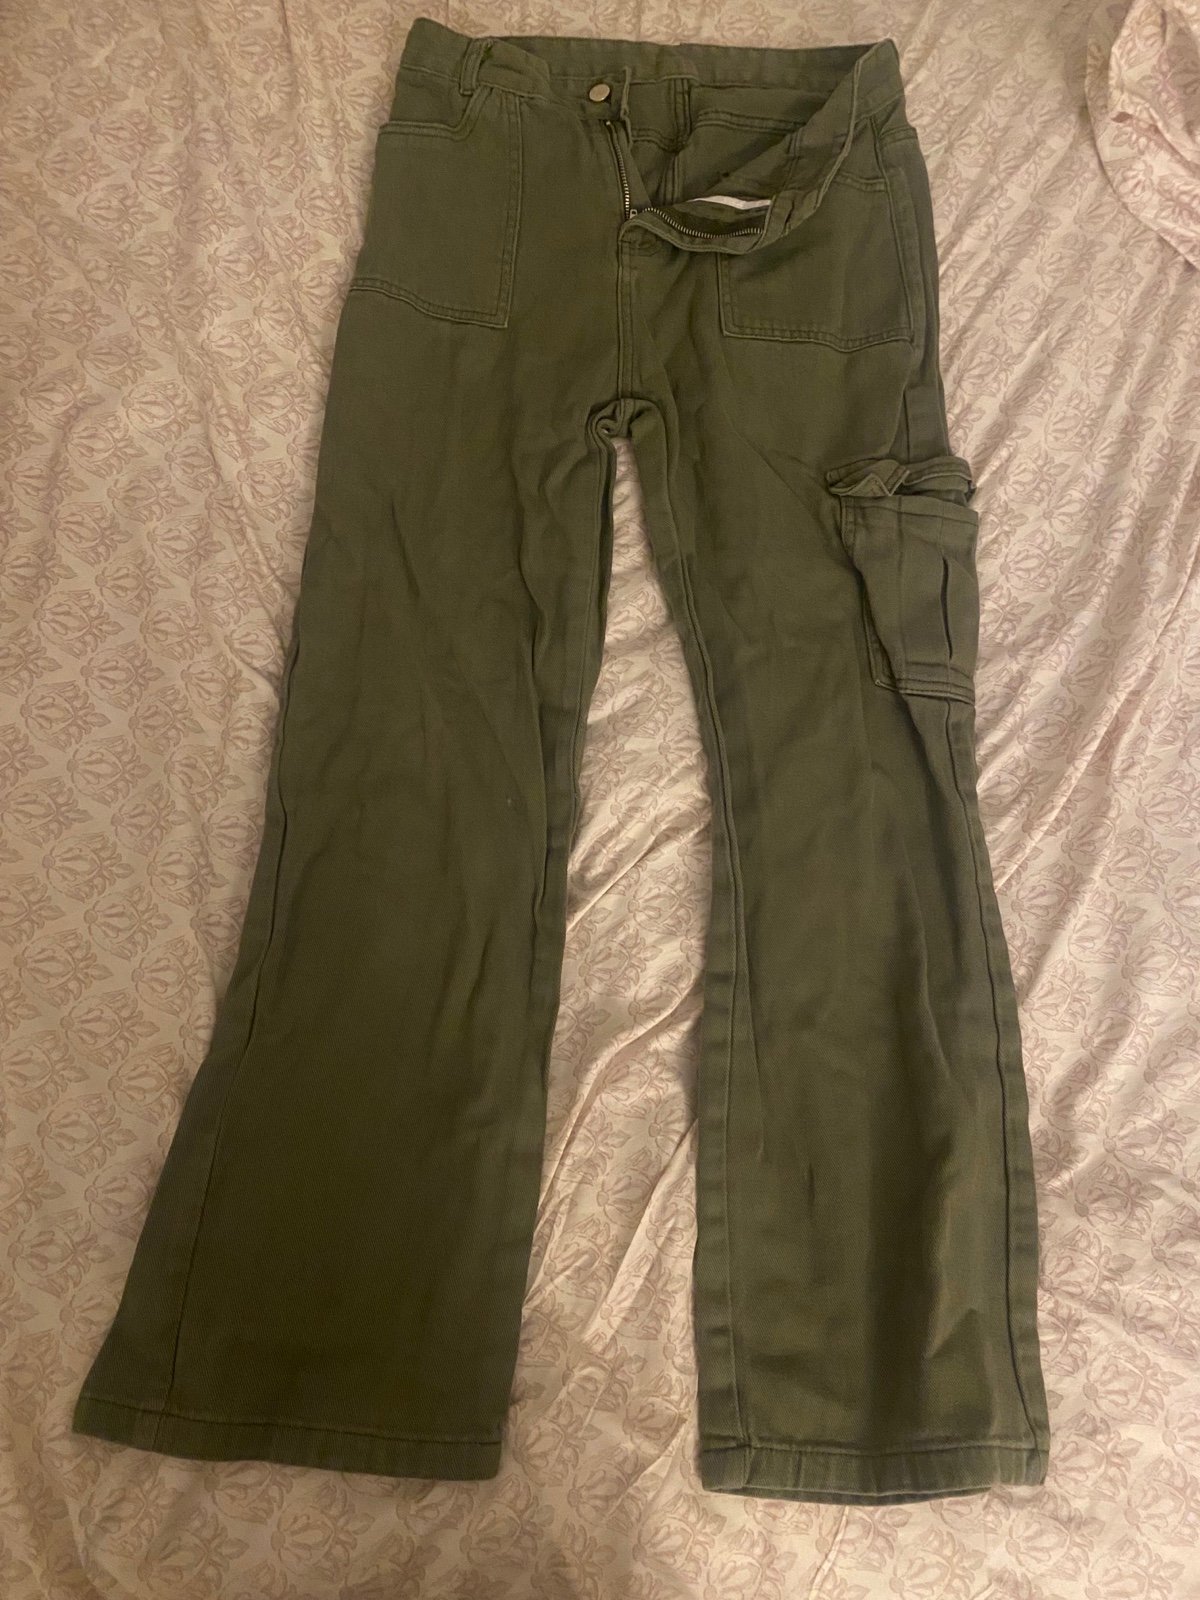 High quality Cargo Pants fOYPZgqPv for sale